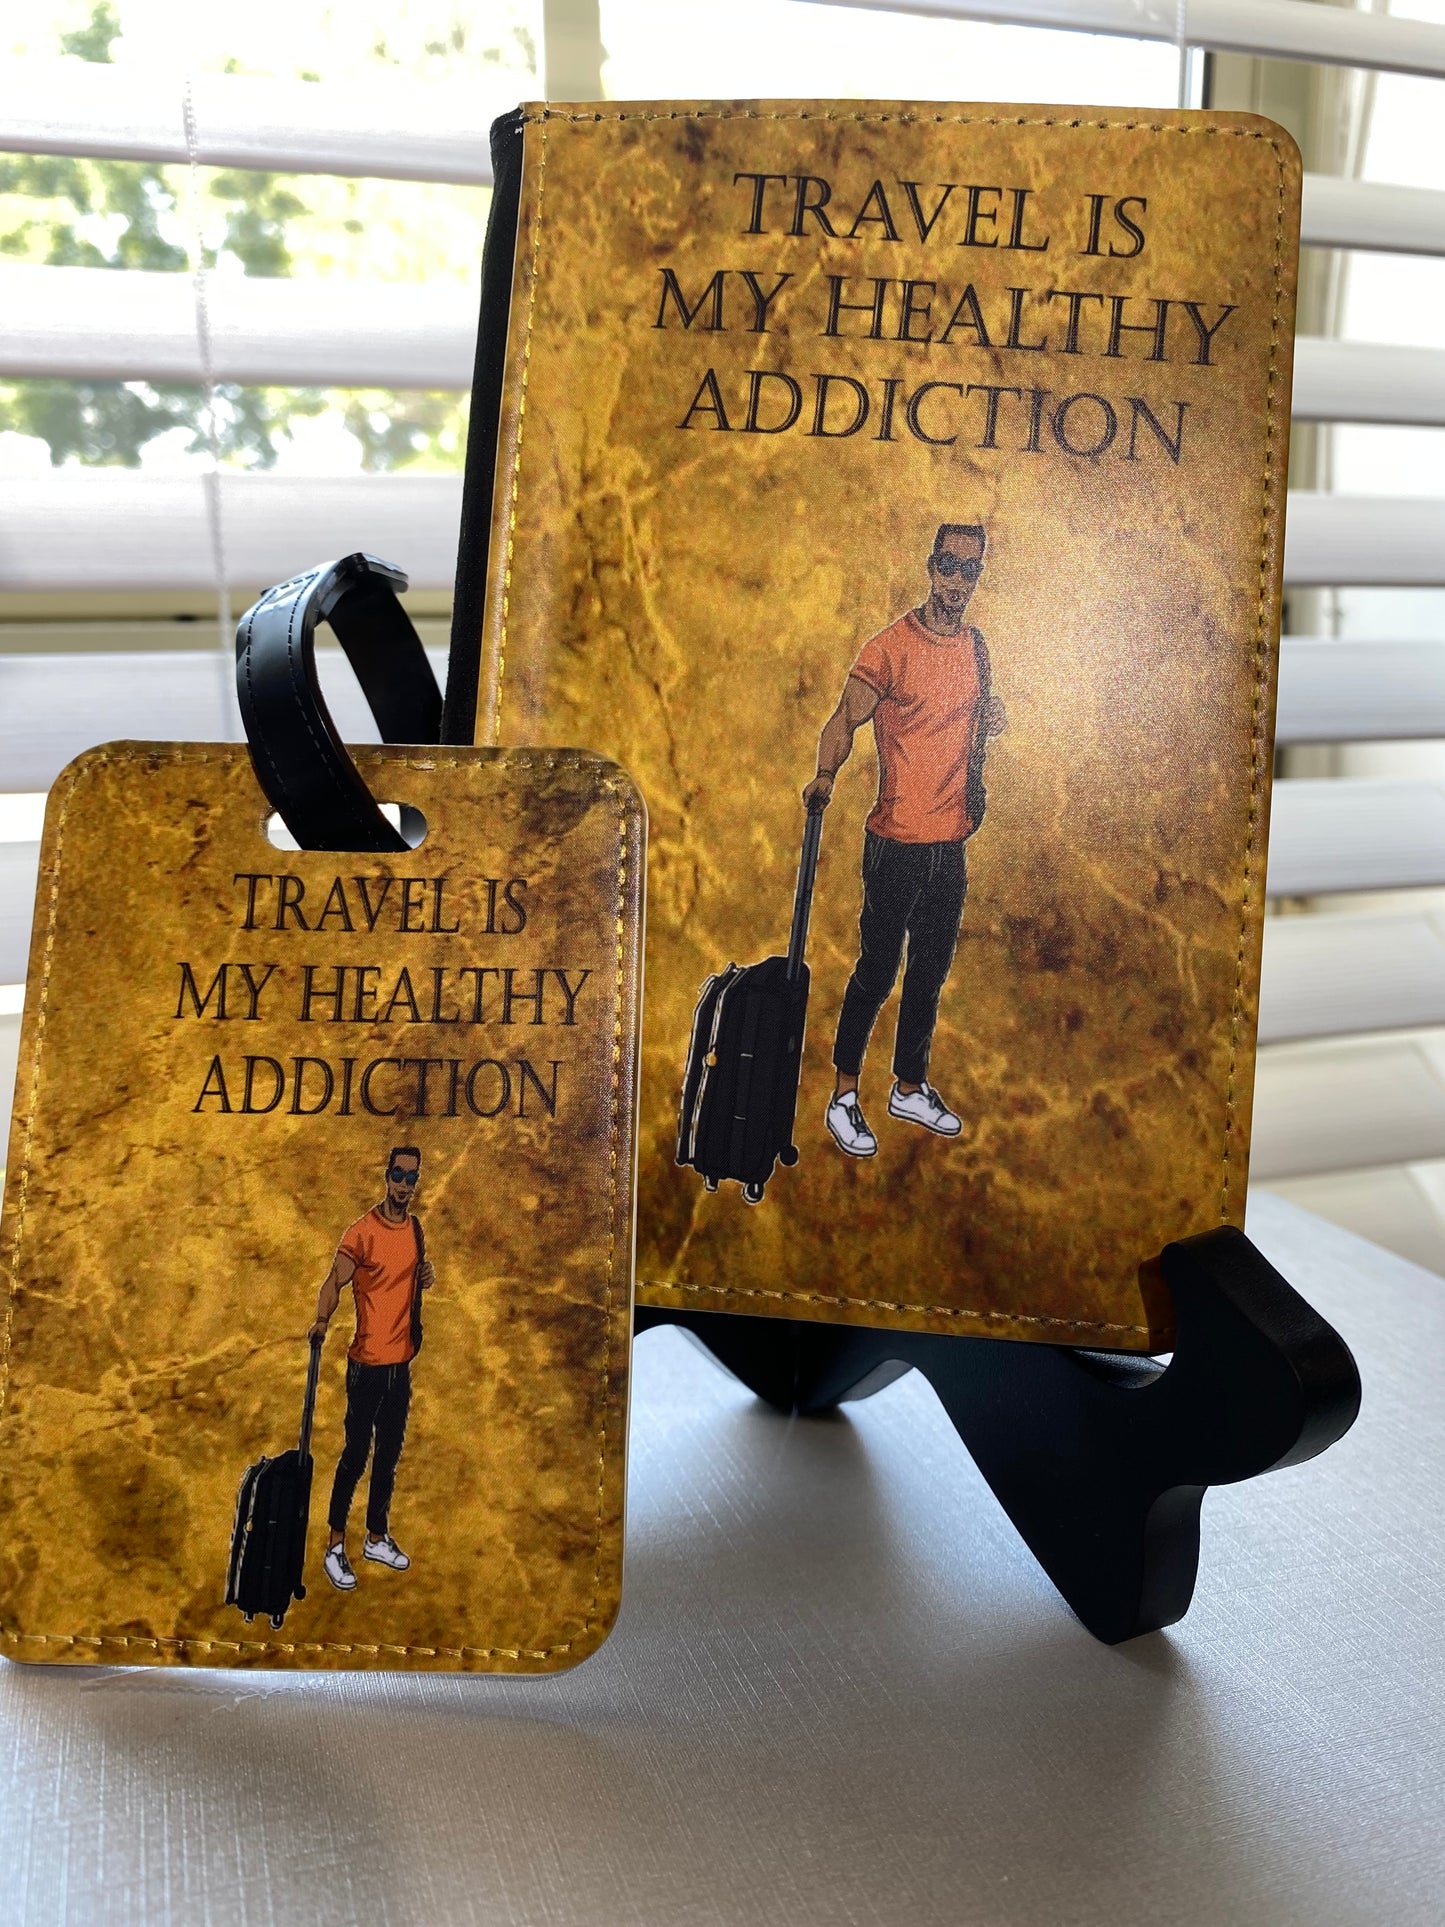 passport cover and luggage tag